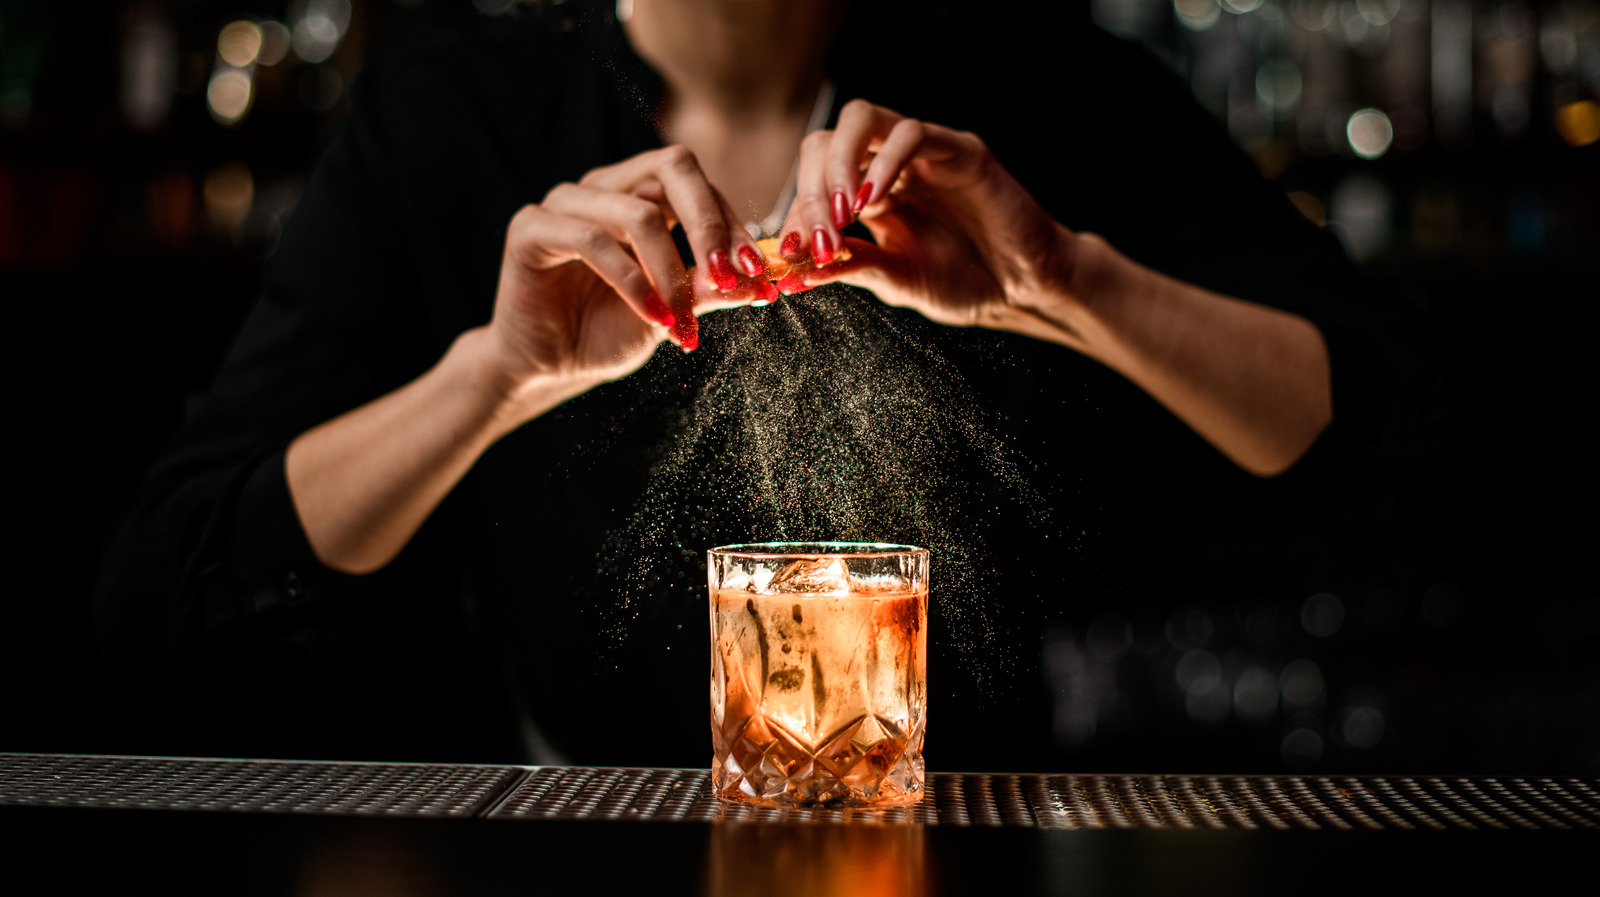 https://www.thedailymeal.com/img/gallery/how-to-perfectly-add-an-orange-peel-to-your-negroni-cocktail-and-what-not-to-do/l-intro-1675543857.jpg